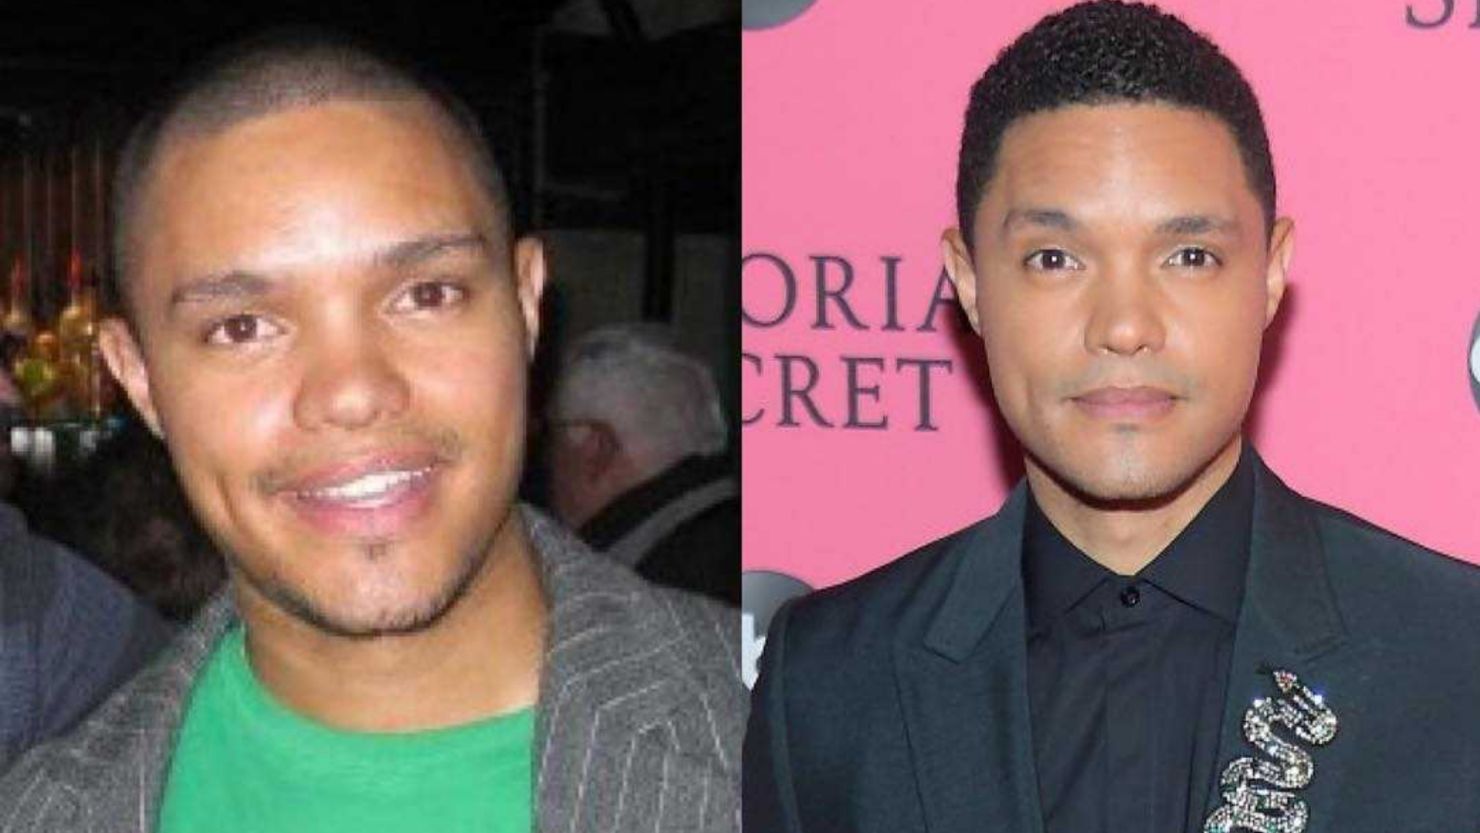 South African comedian and The Daily Show host Trevor Noah takes on the #10YearChallenge